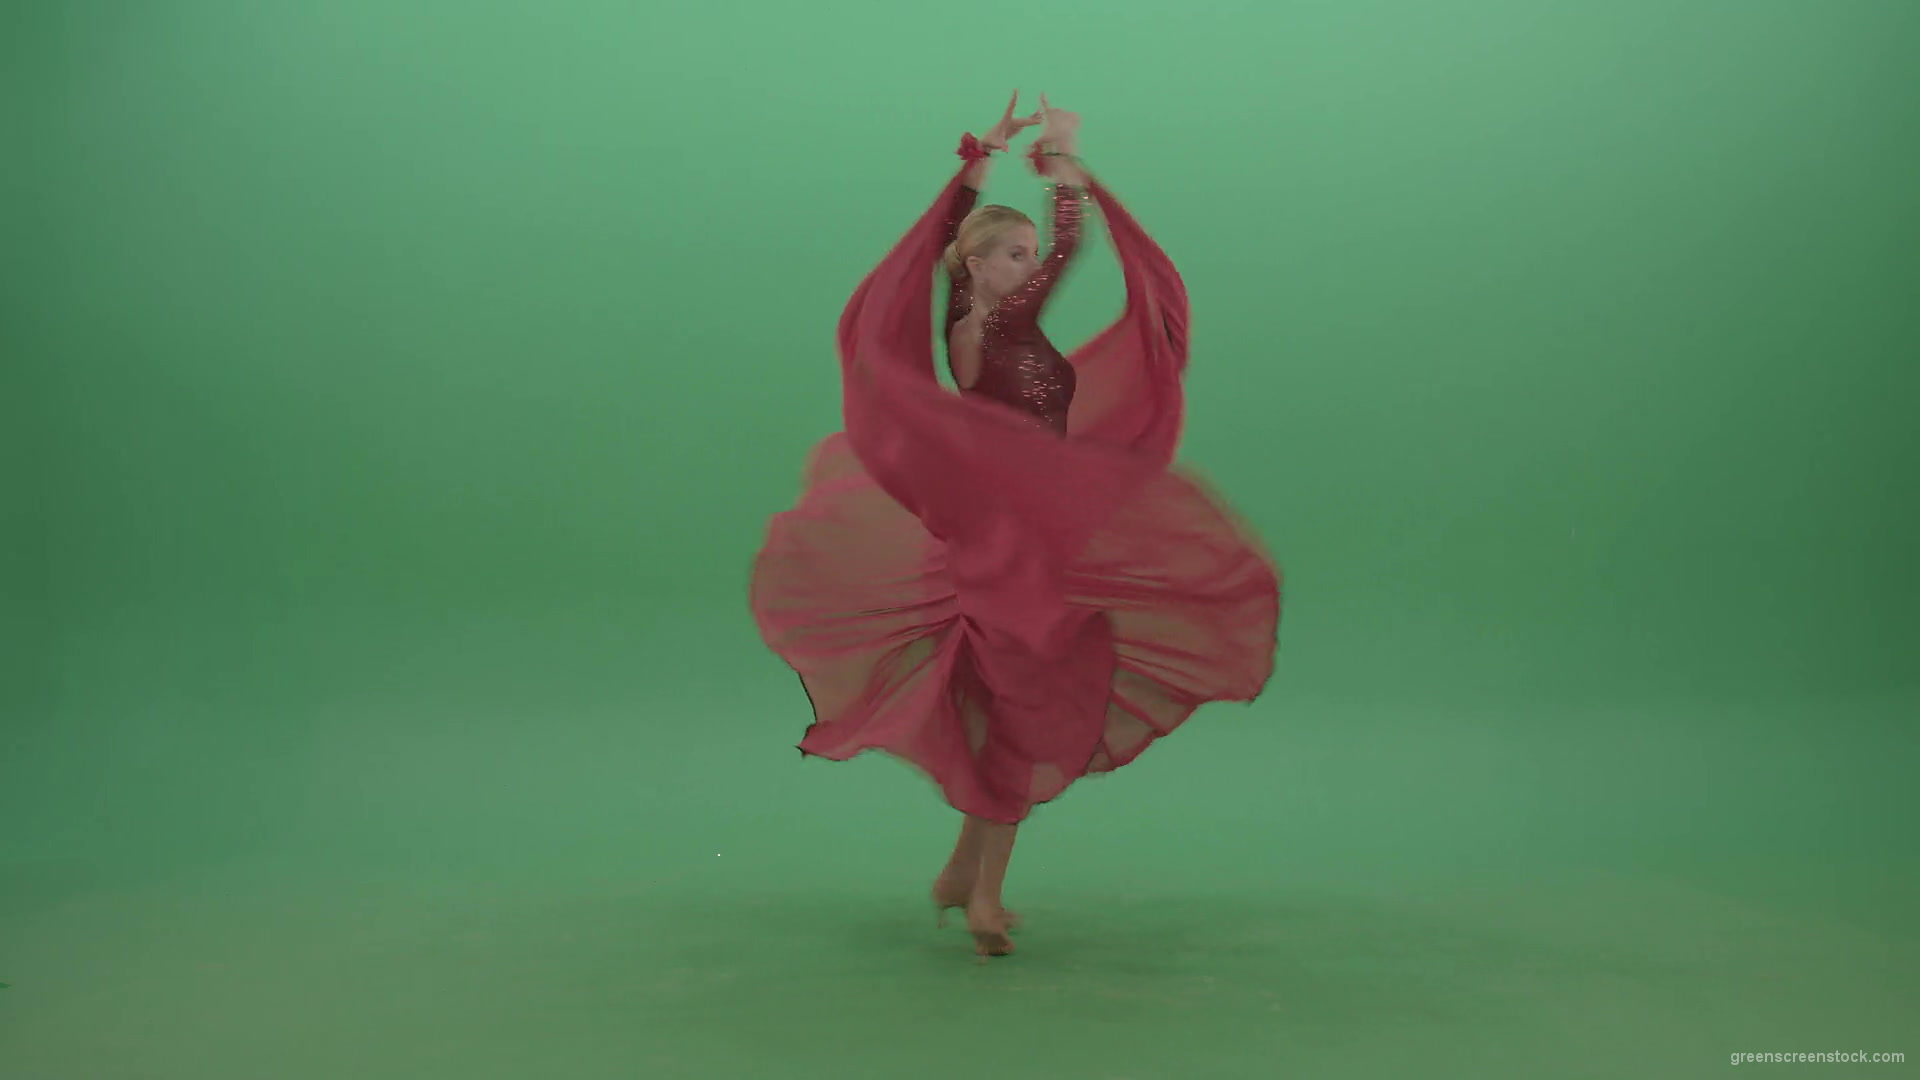 Passion-elegant-girl-in-red-dress-dancing-flamenco-isolated-on-green-screen-4K-Video-Footage-1920_008 Green Screen Stock